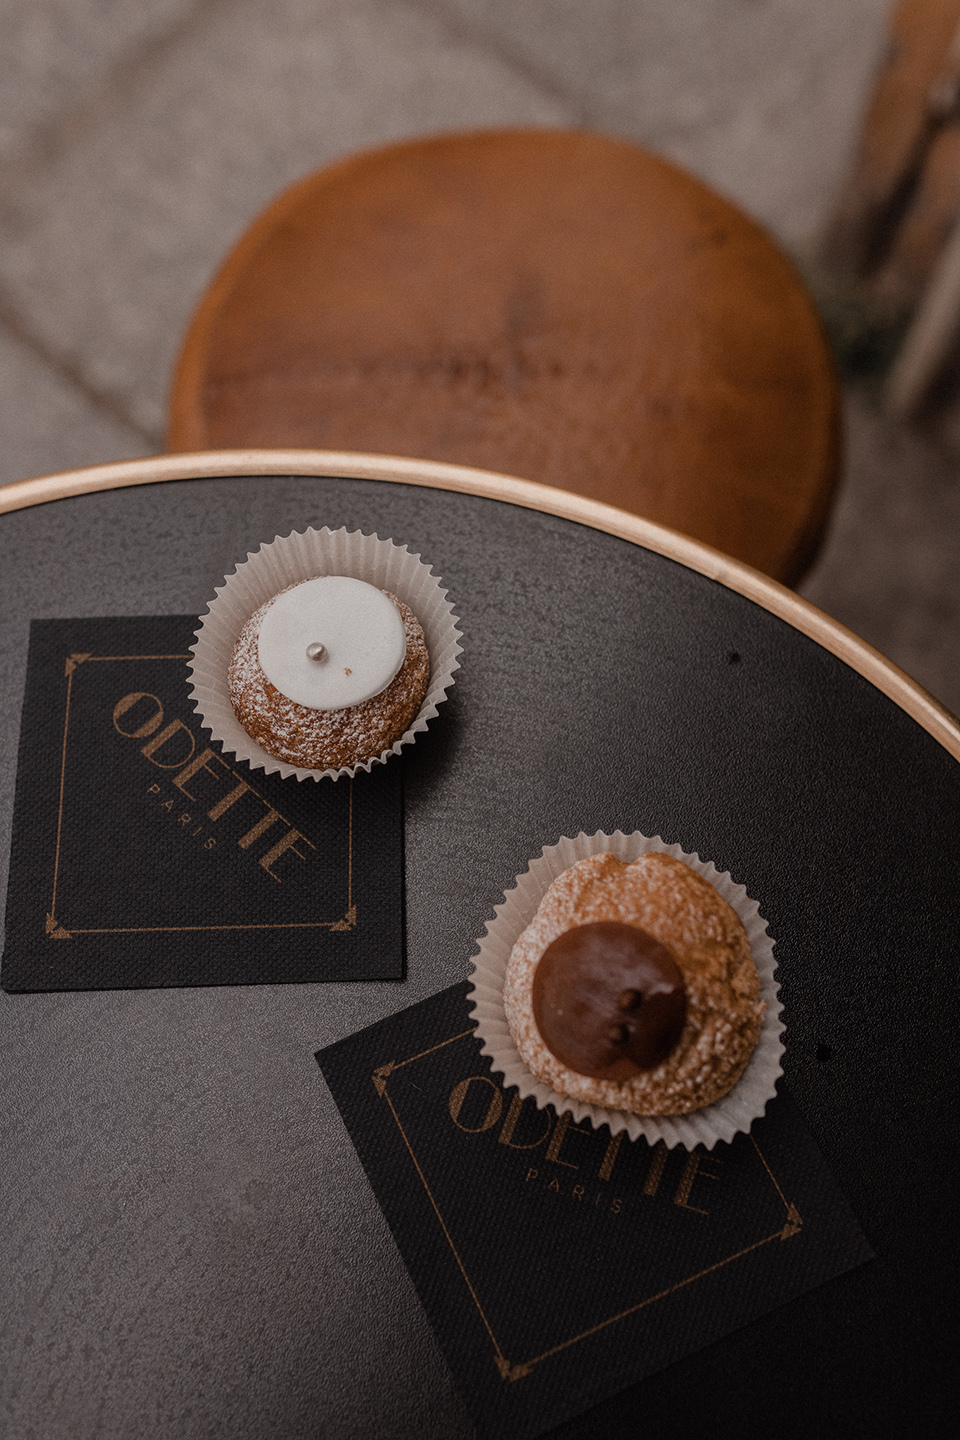 Chocolate and vanille cream puffs from Odette Paris